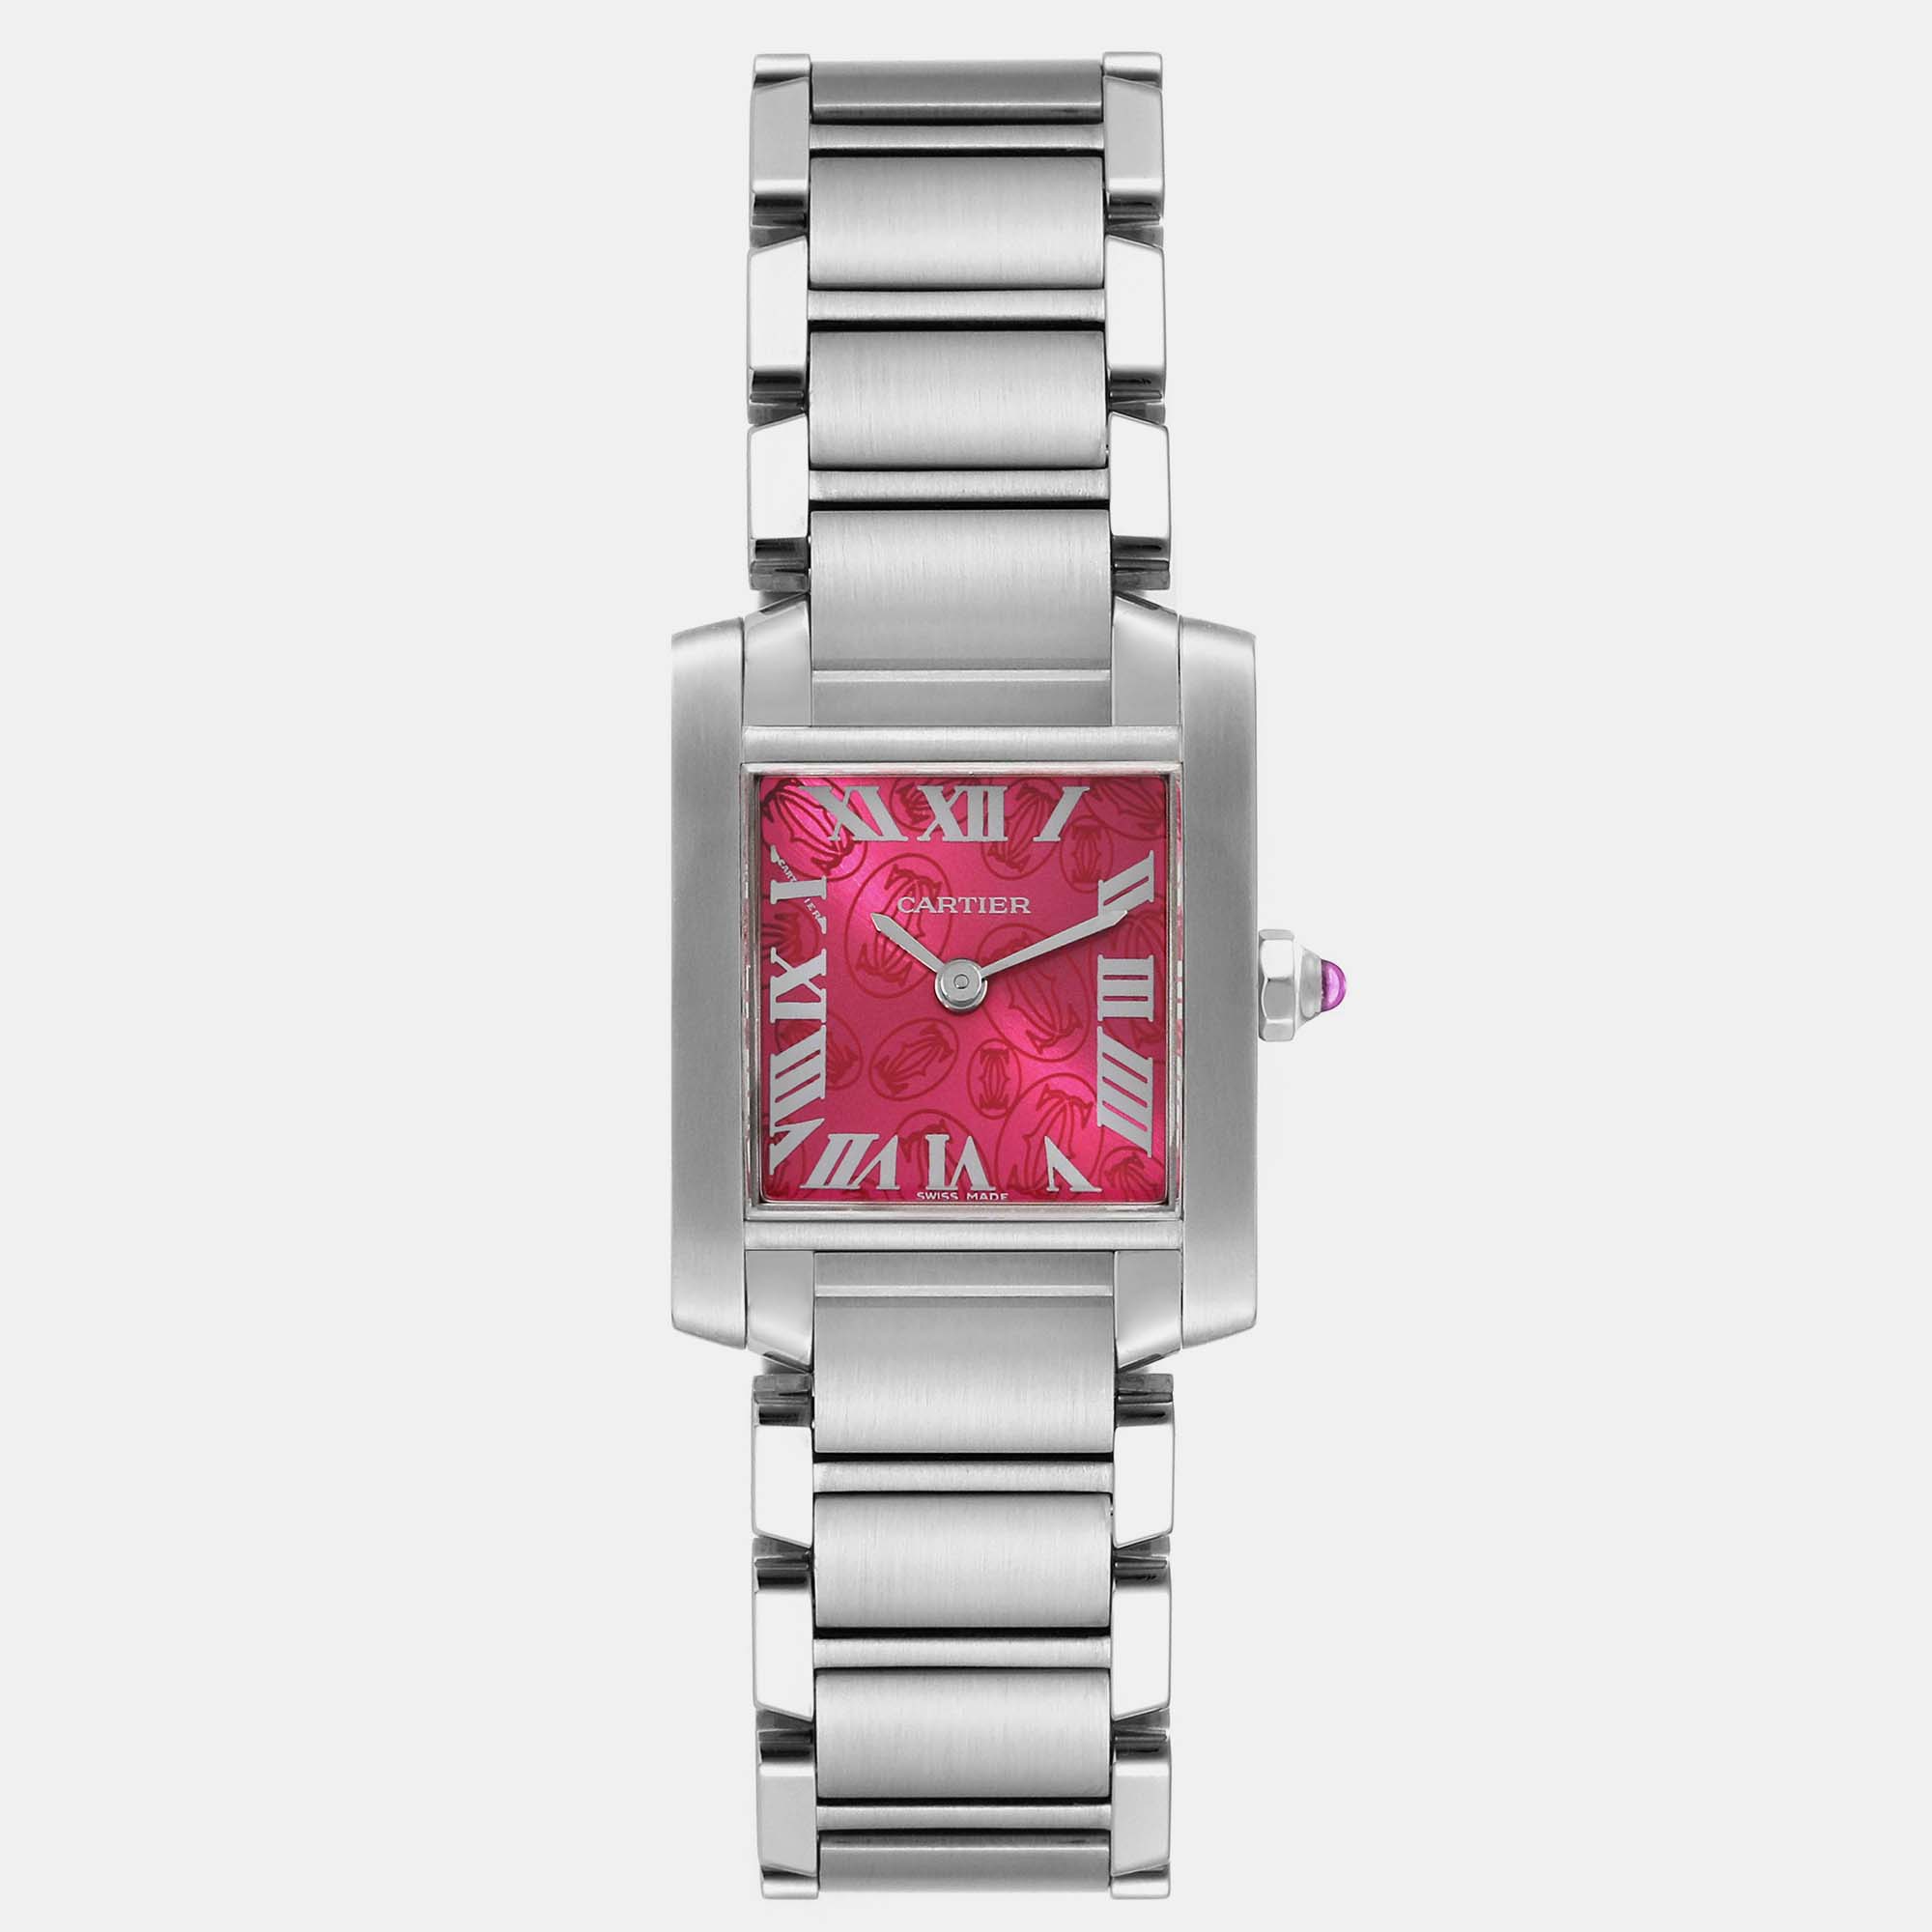 

Cartier Tank Francaise Raspberry Dial Limited Edition Steel Ladies Watch W51030Q3 20 x 25 mm, Pink